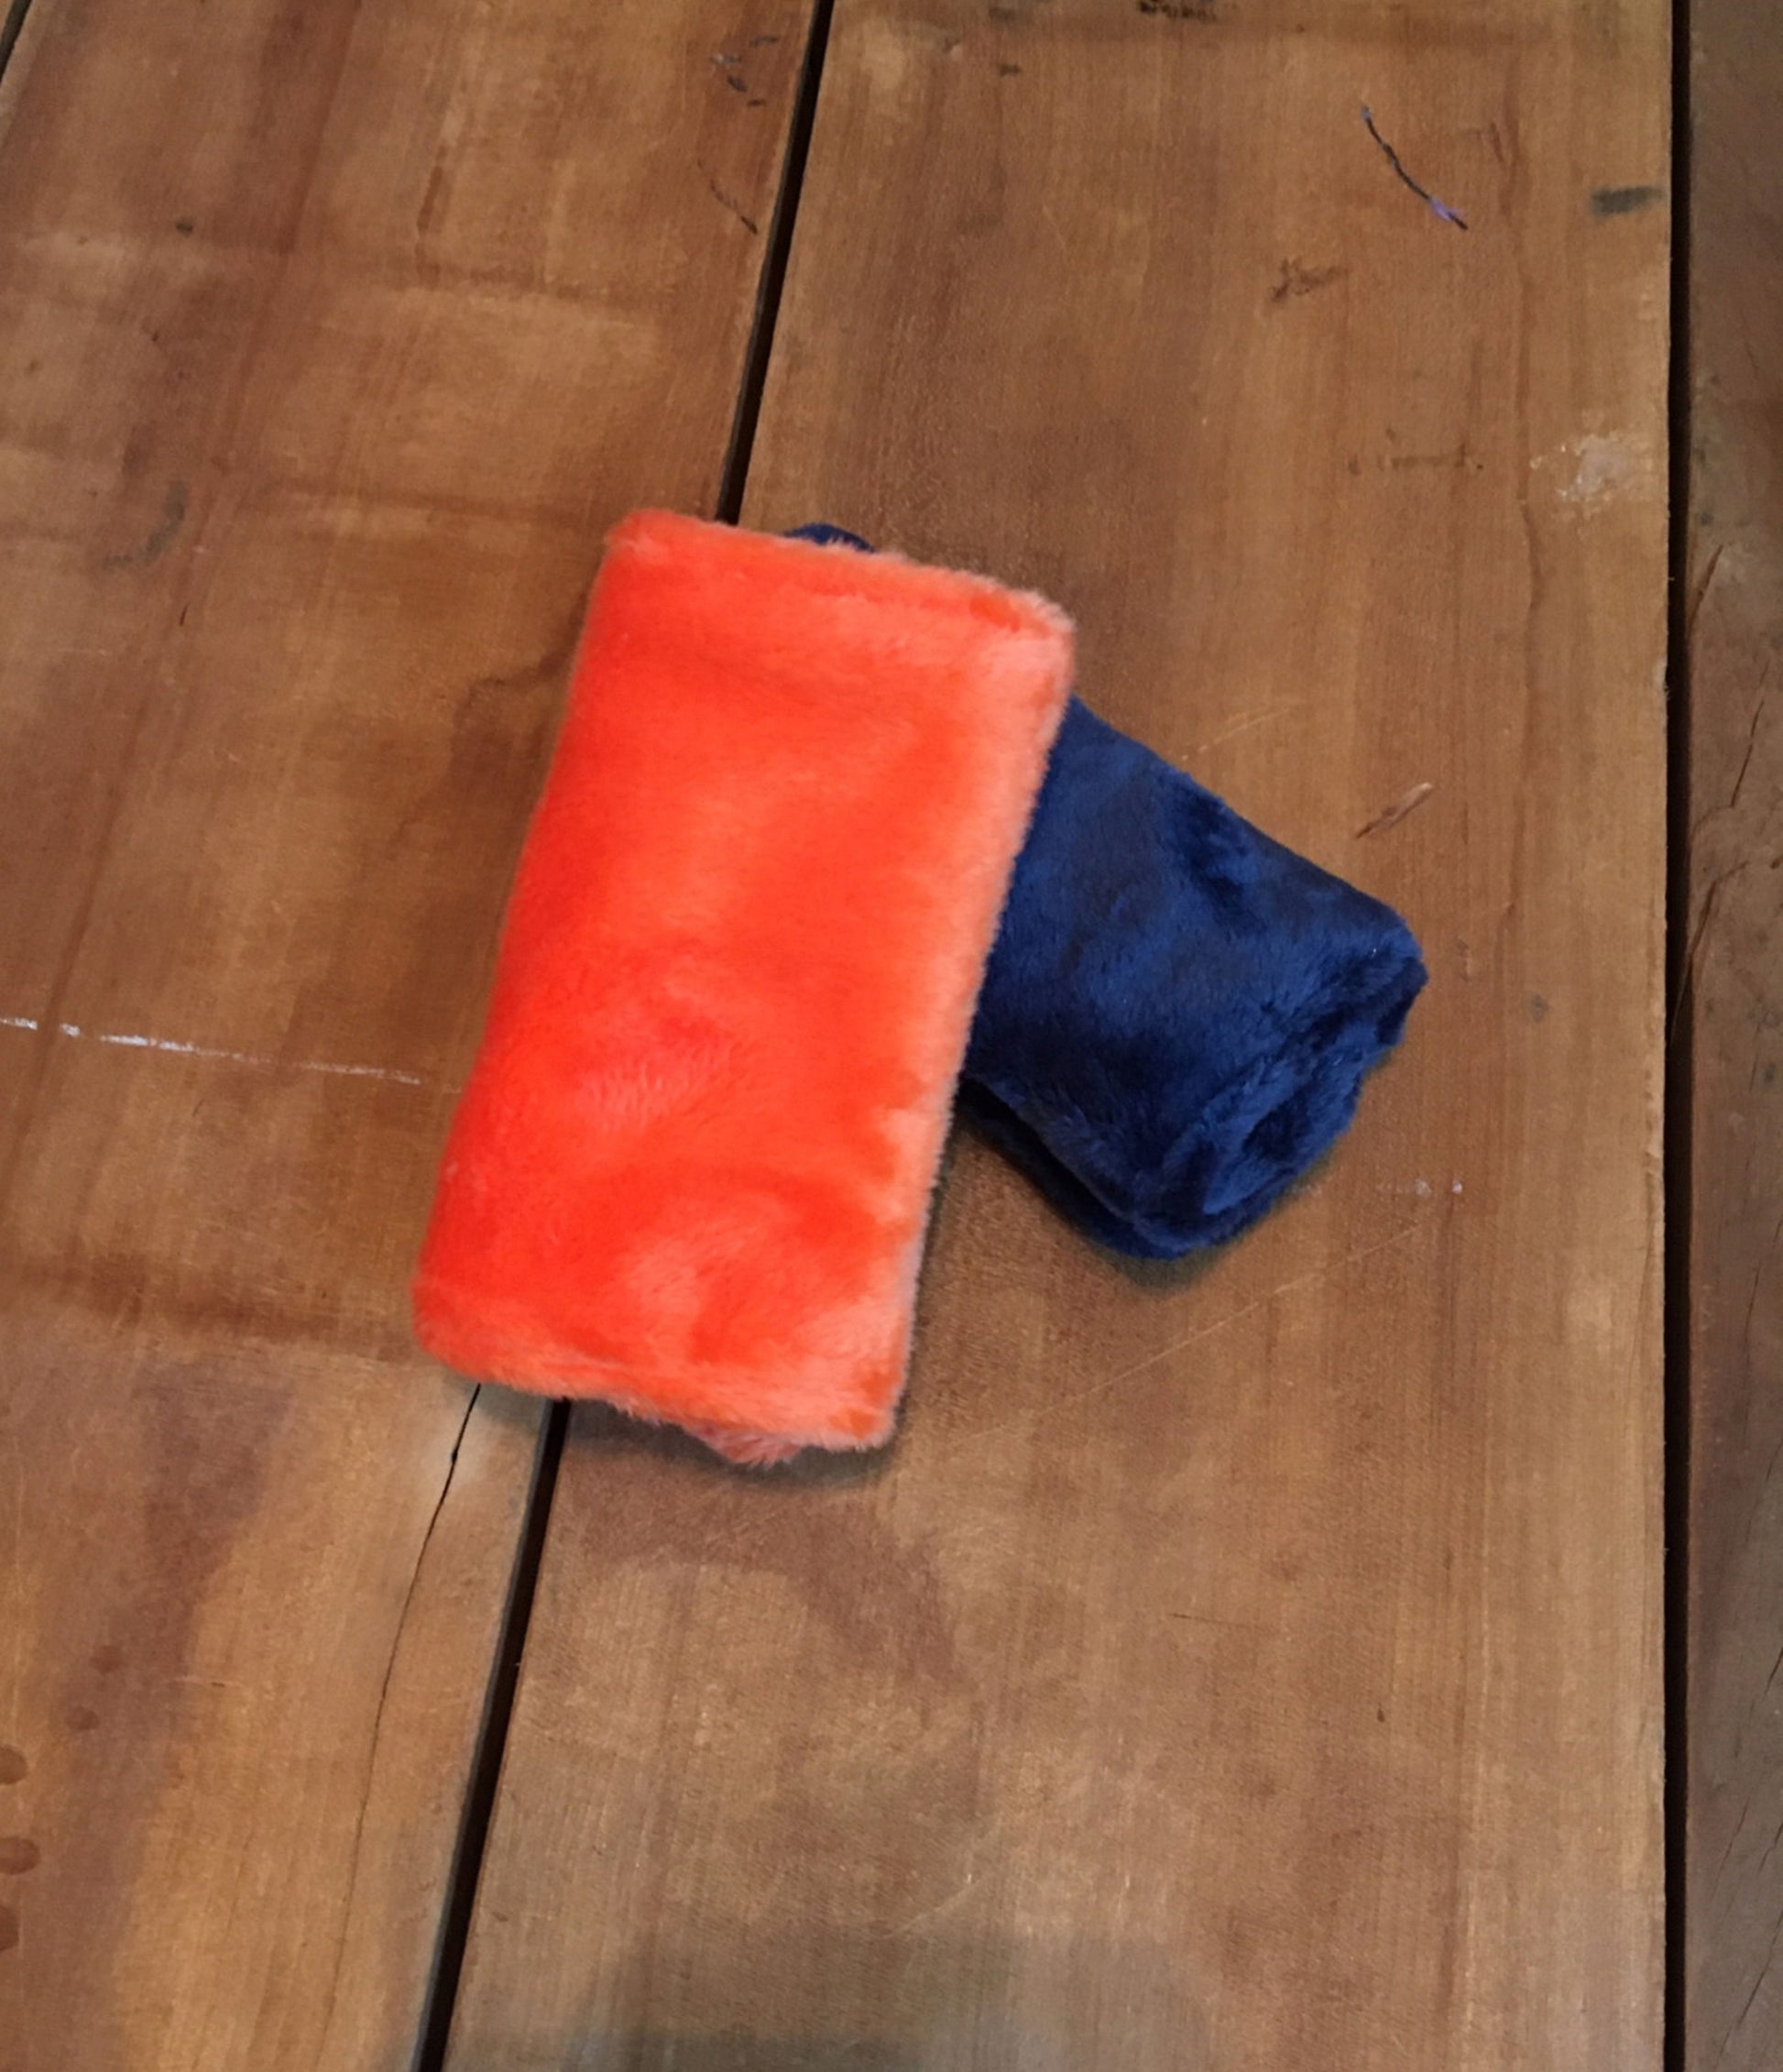 flat orange and flat navy minky strap covers 4" size